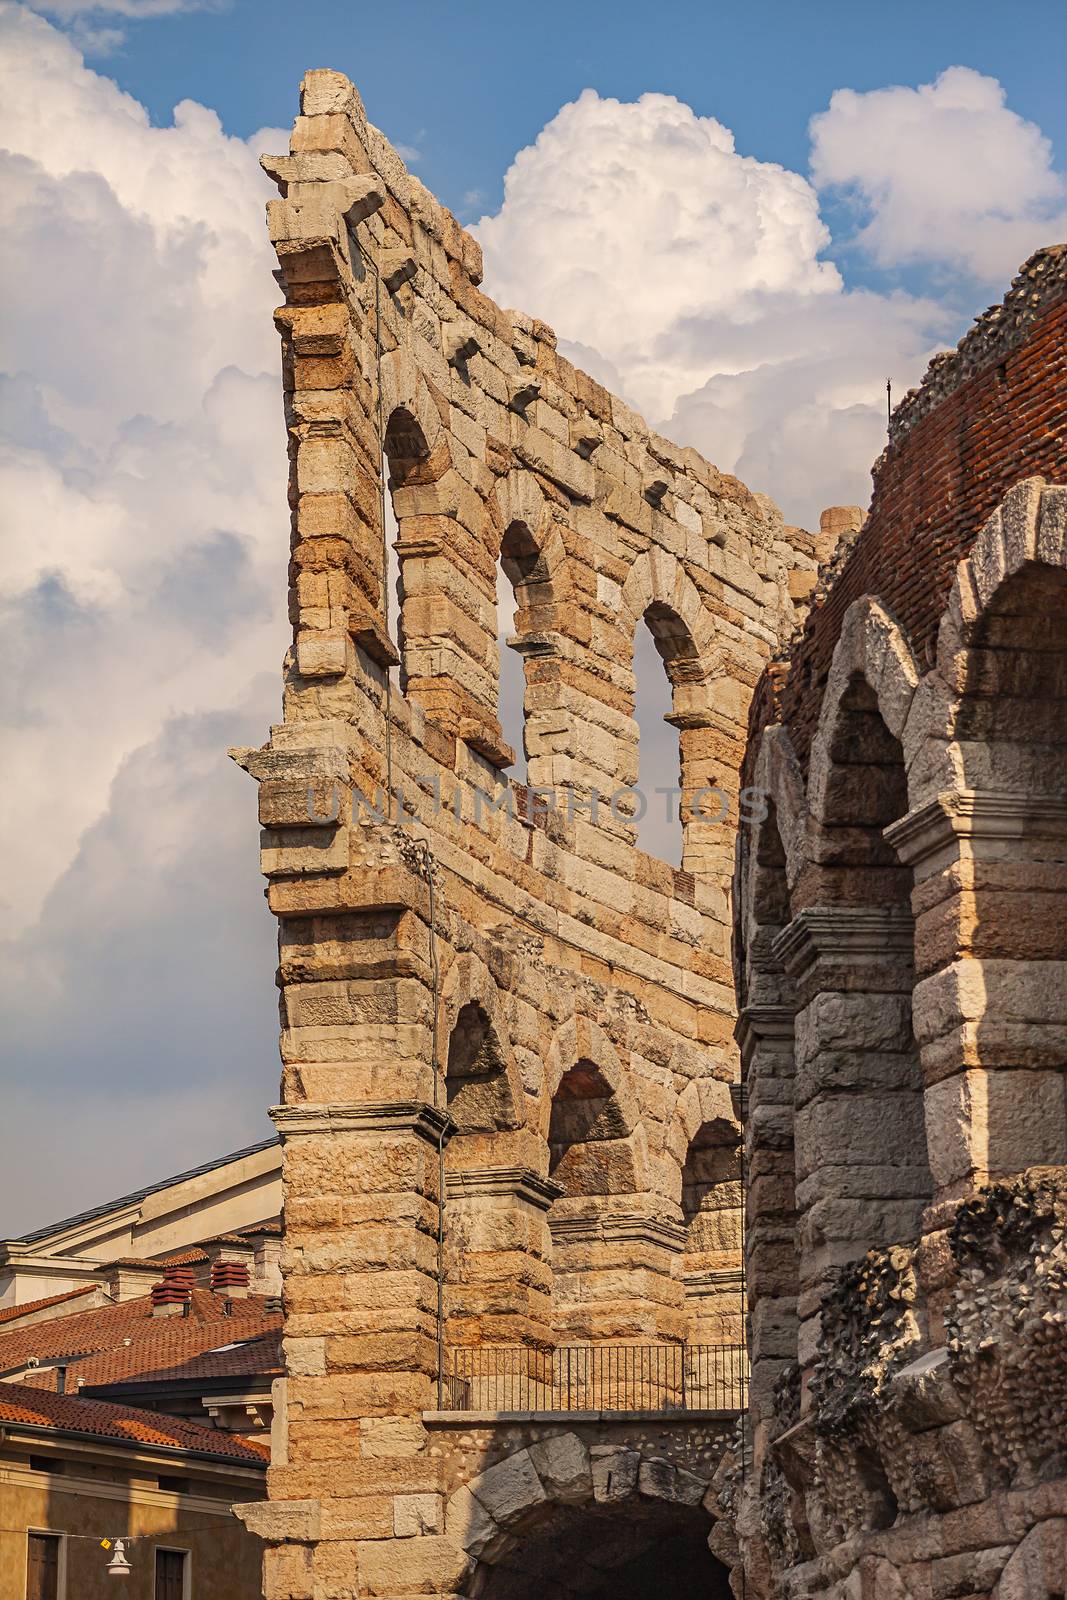 Detail of Arena di Verona, the most famous ancient building in the city